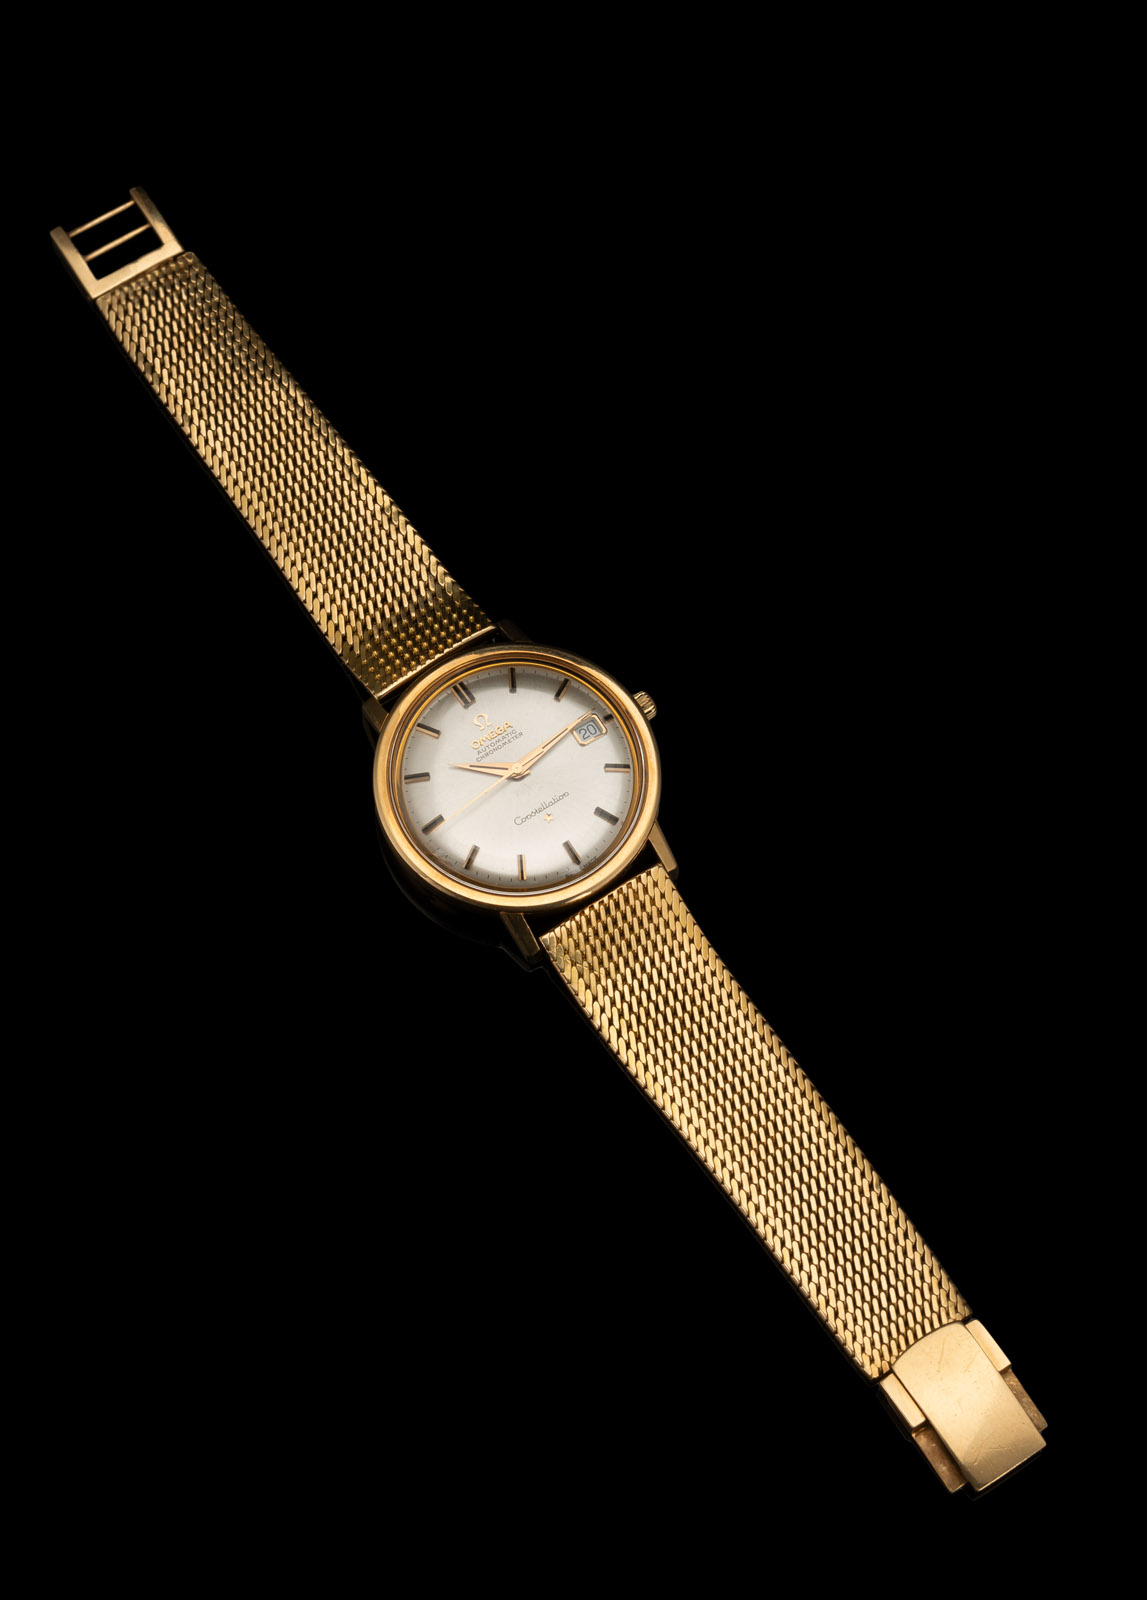 A FINE OMEGA GENTLEMAN'S GOLD WATCH - Image 2 of 3